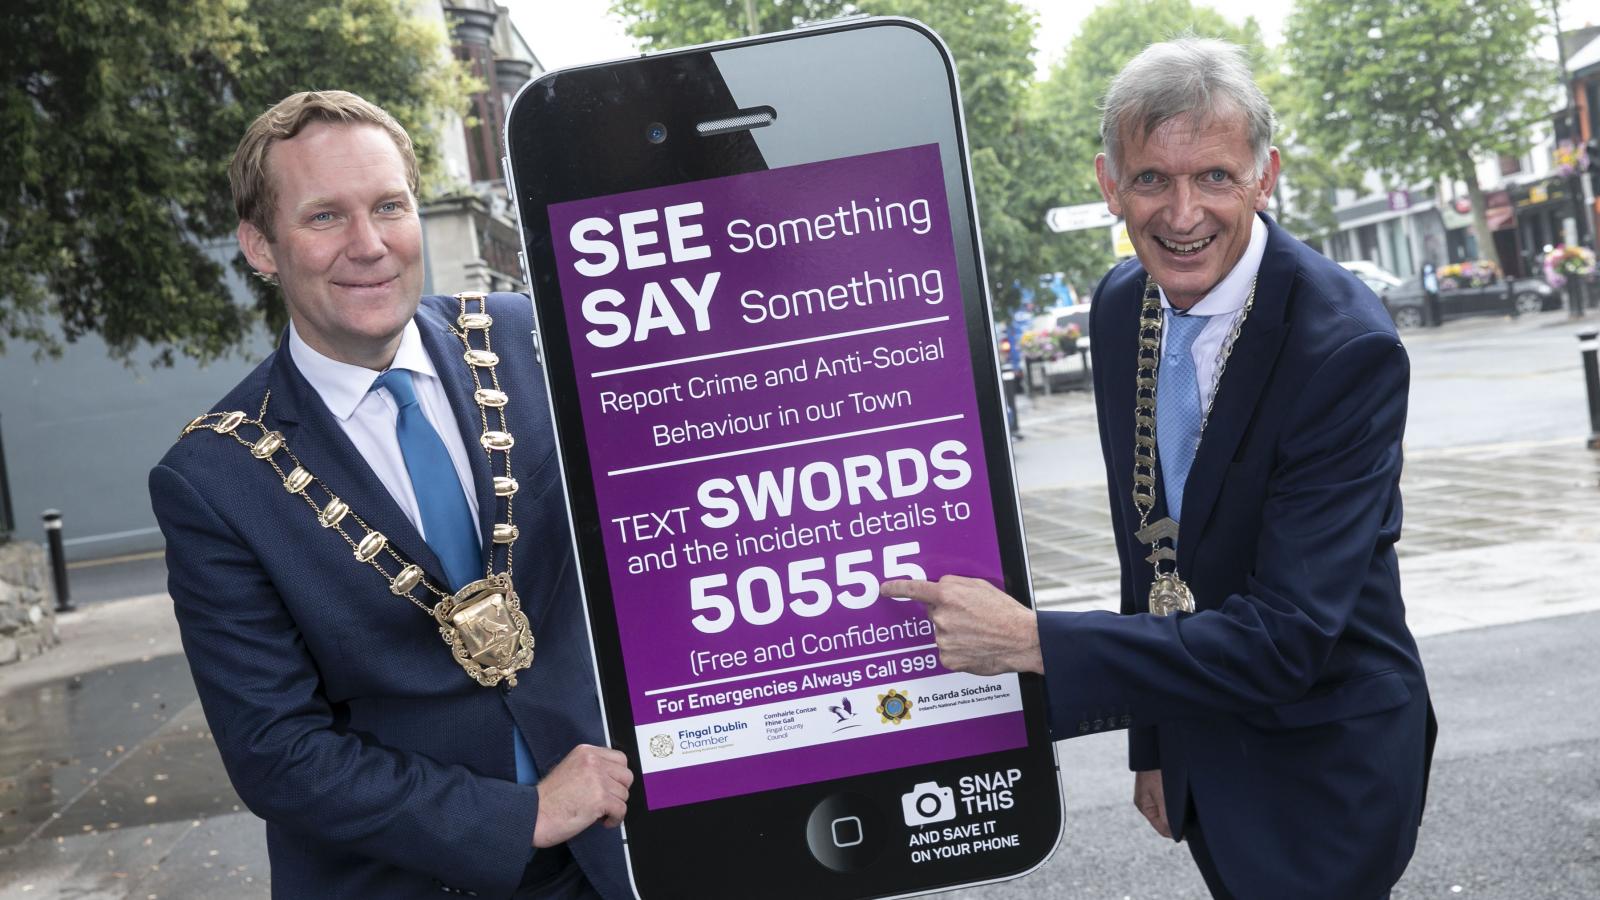 Mayor of Fingal Cllr Eoghan O'Brien and Fingal Dublin Chamber President Bill Kearney promoting the new text alert service 